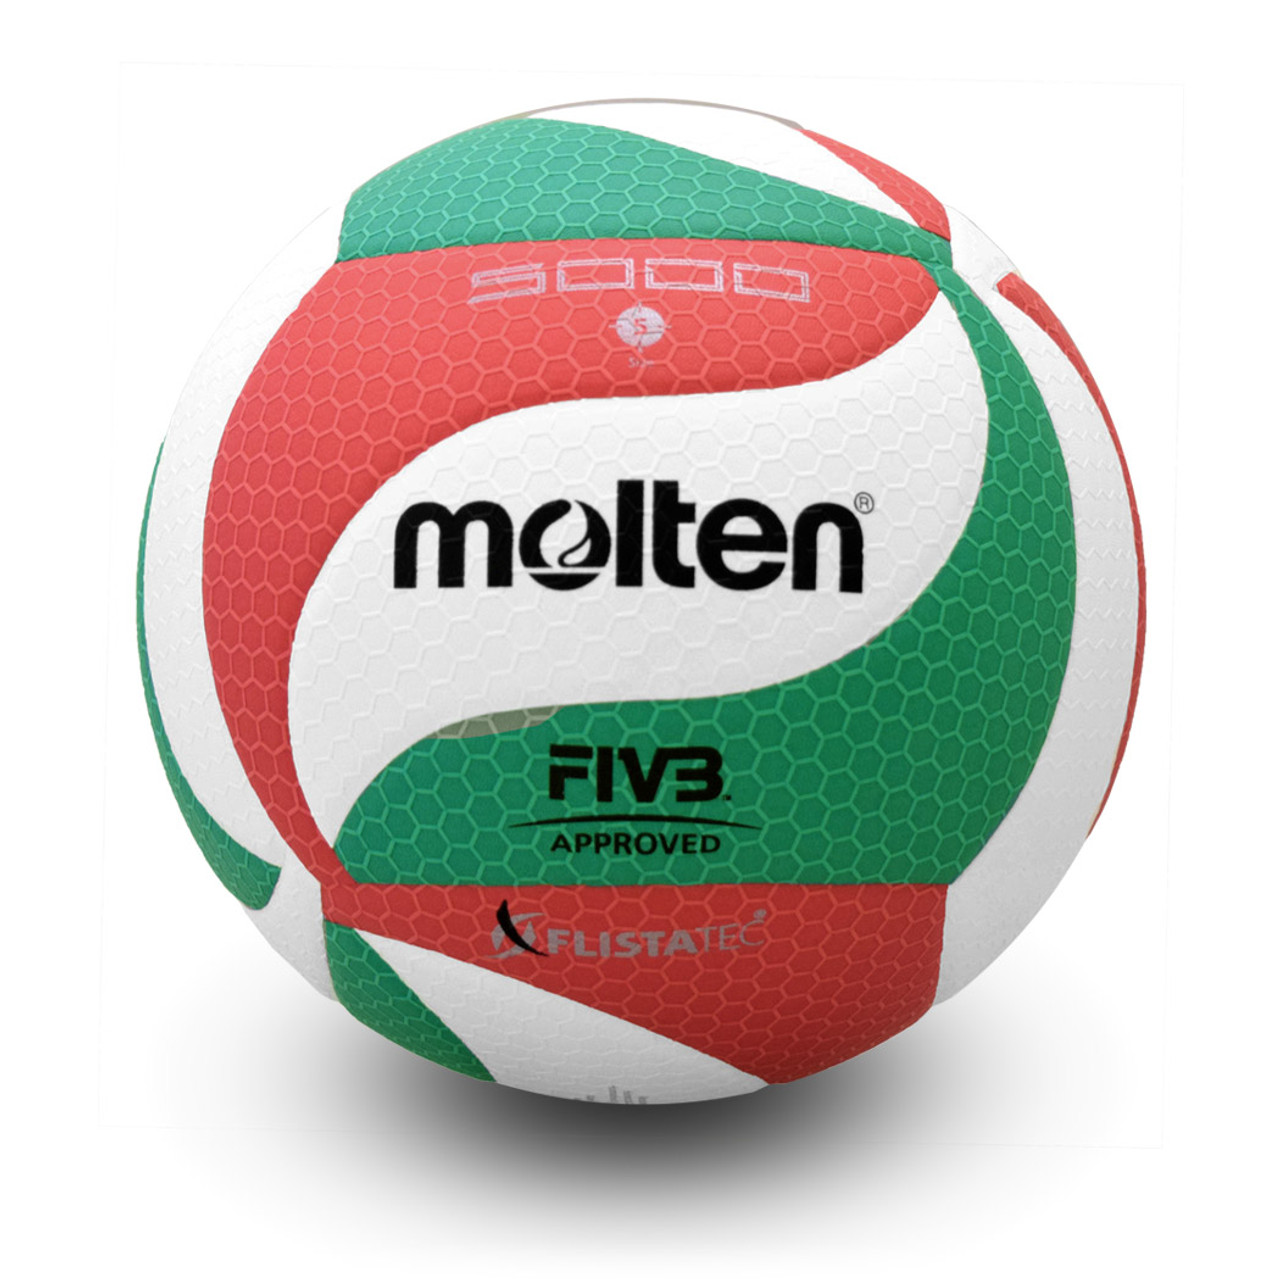 Molten V5M5000 FIVB Approved Flstatic Volleyball Size5 Offical Sport From Japan 